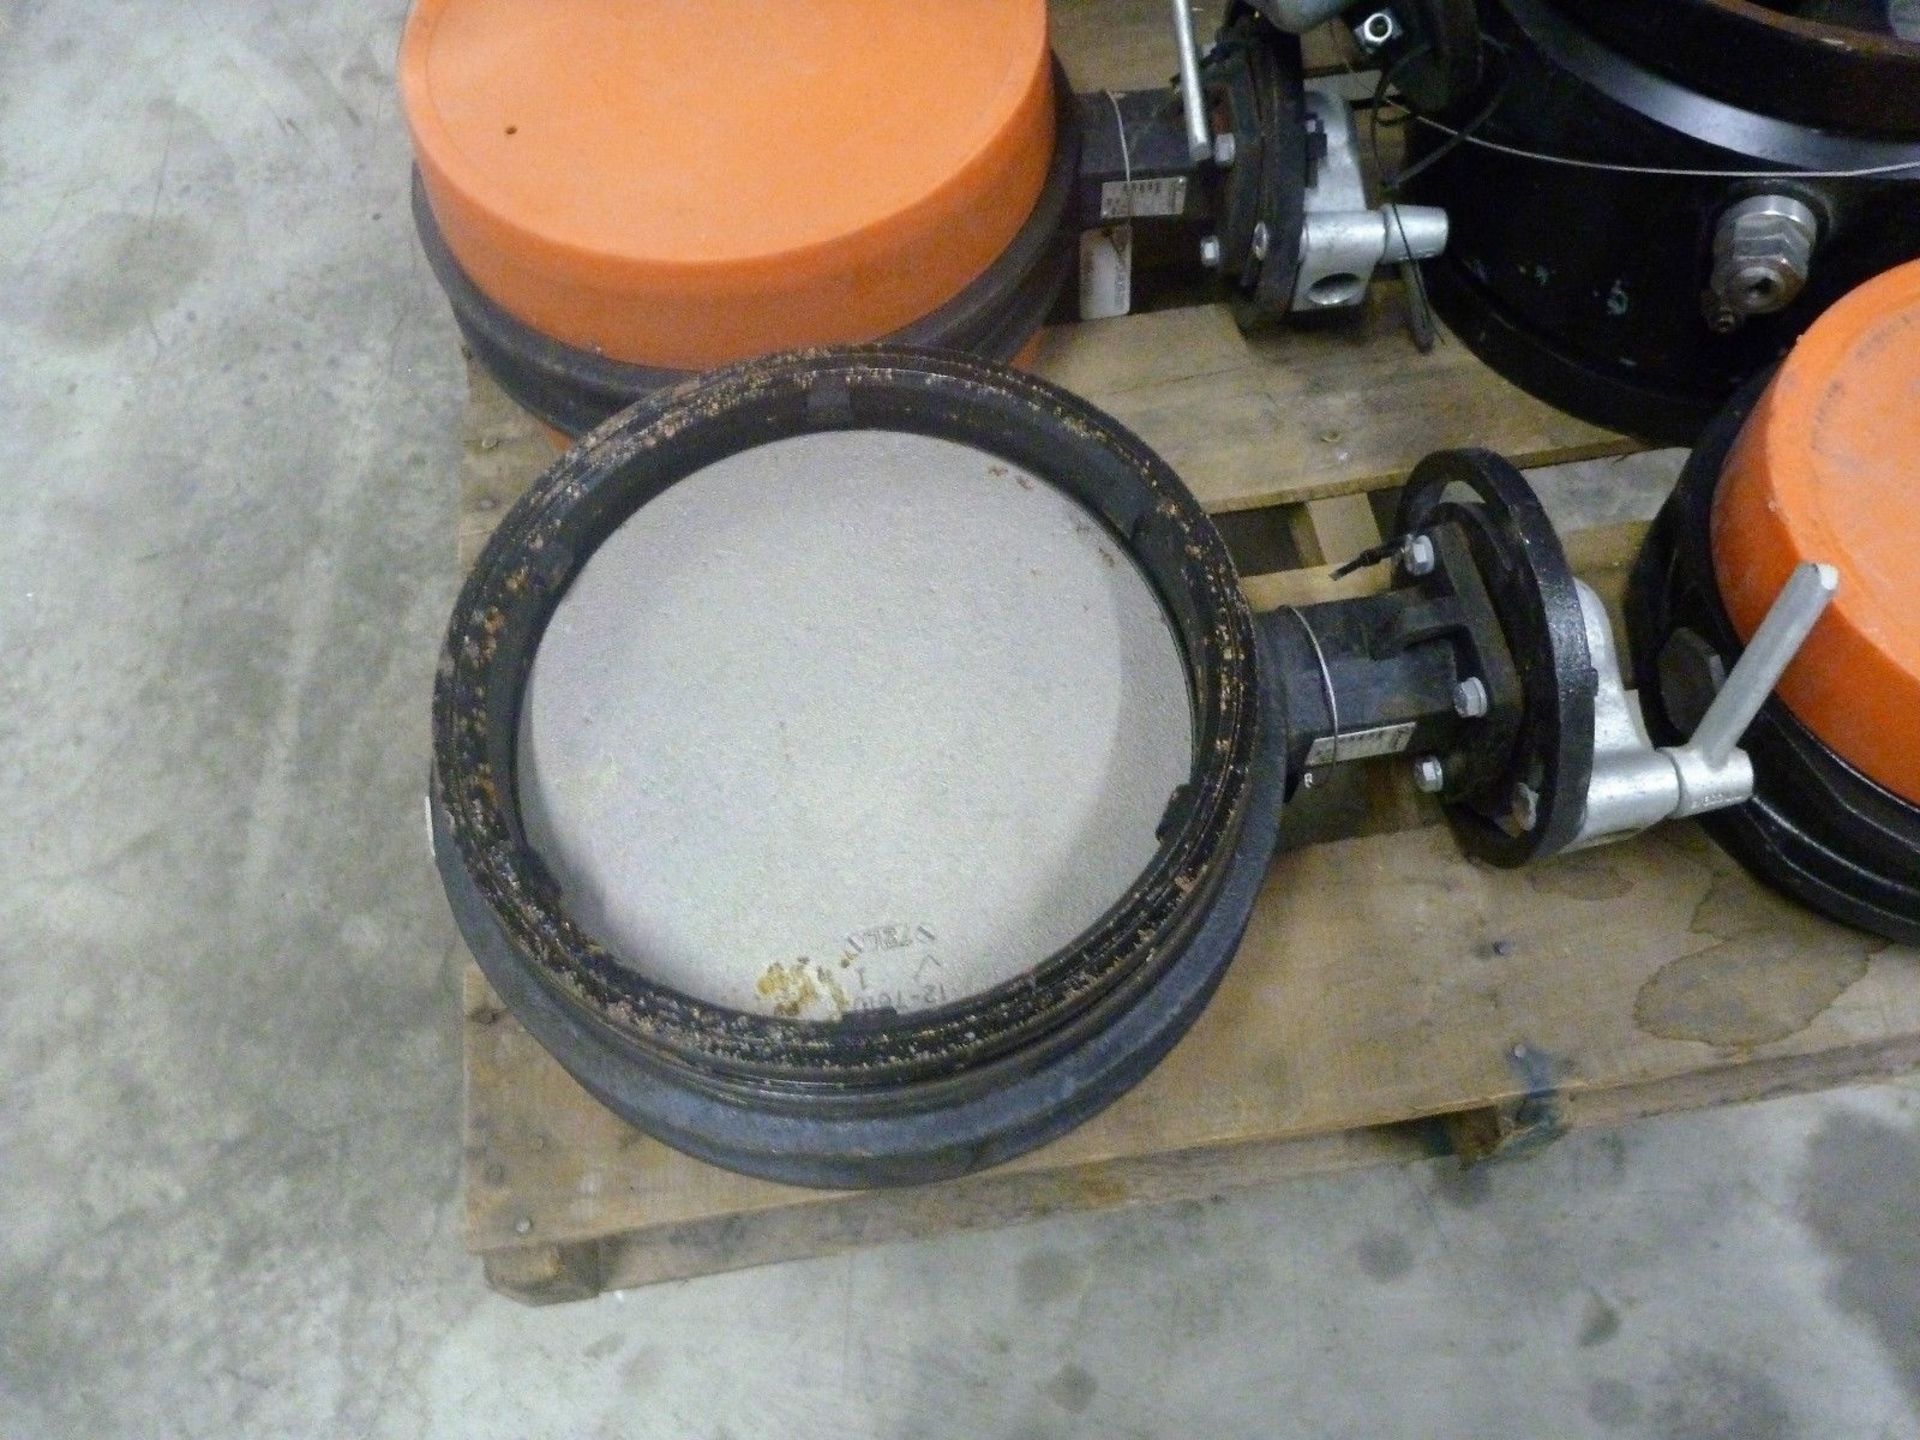 Lot of 3 Victaulic 12" Butterfly Valves